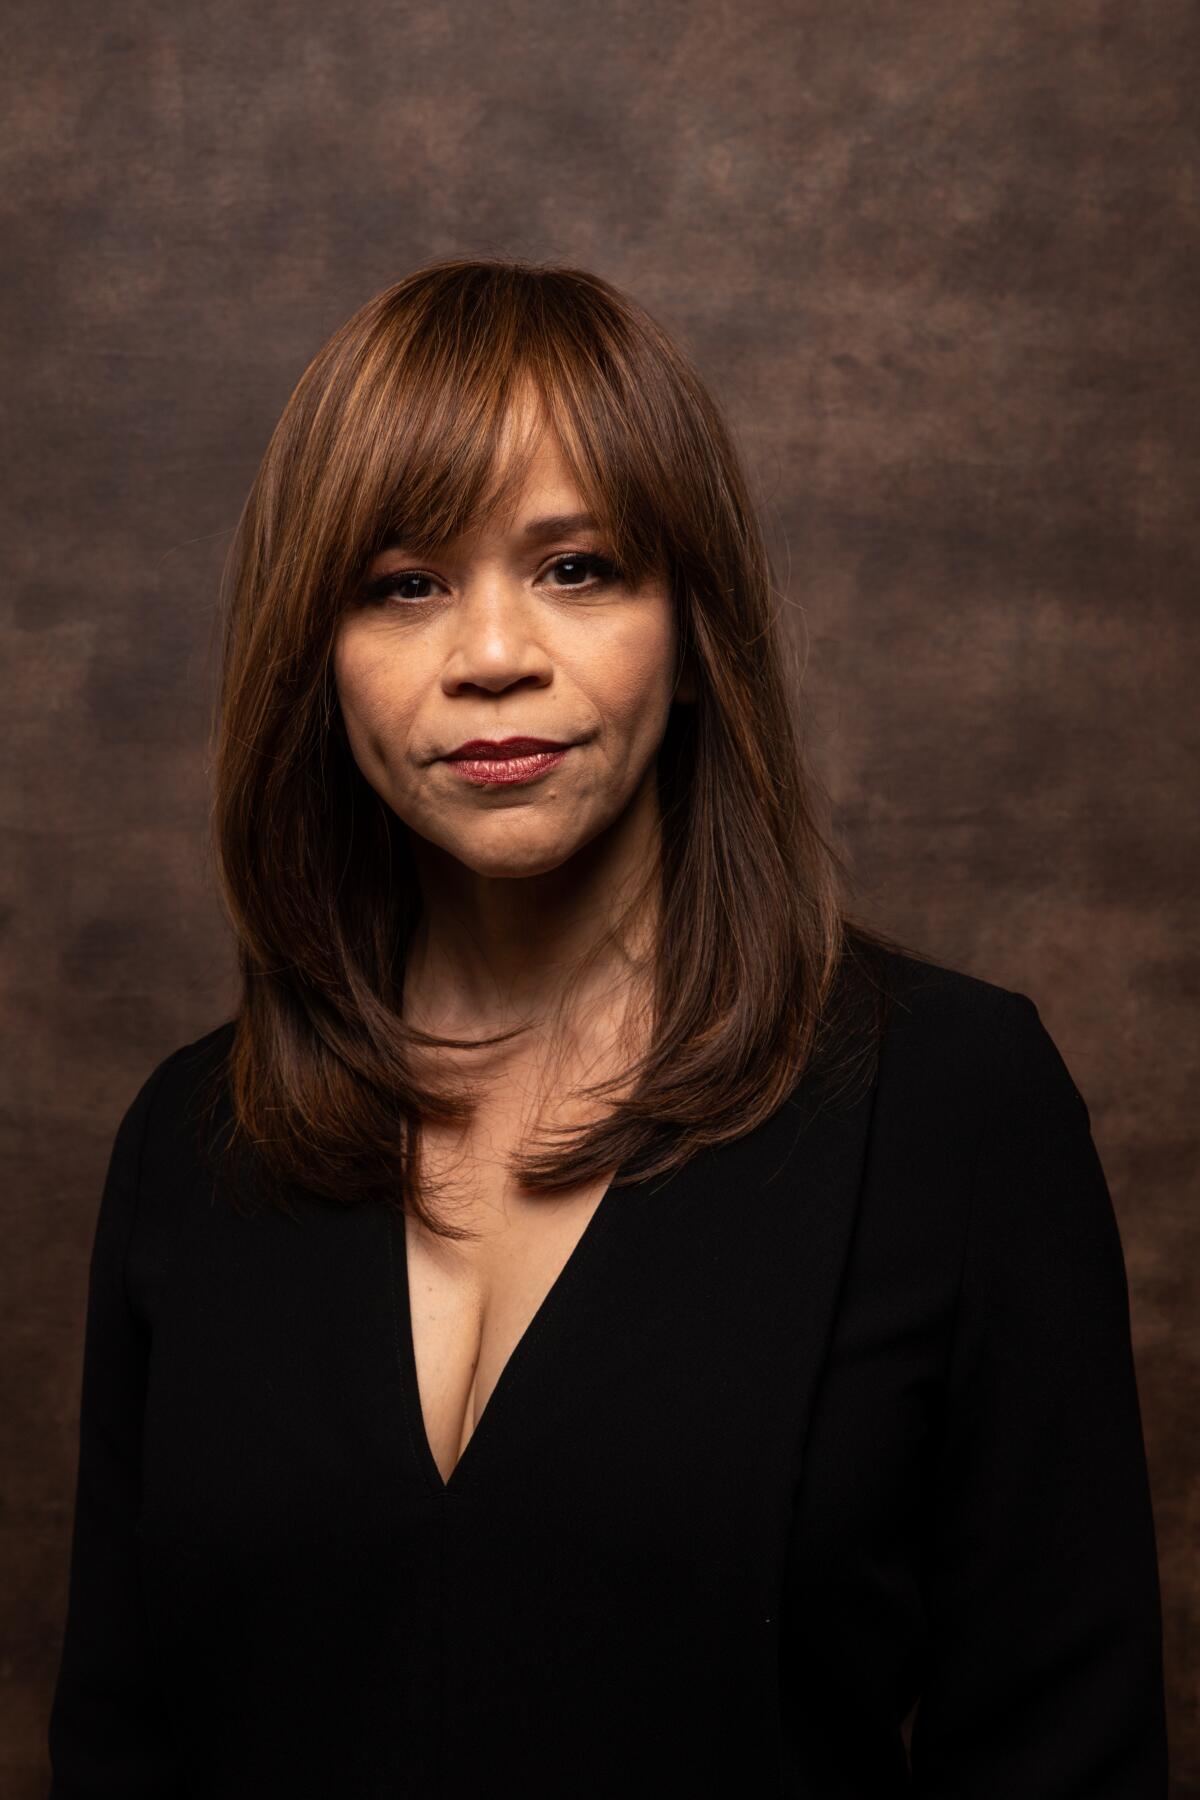 Actor Rosie Perez stares directly at the camera in a portrait taken at the Sundance Film Festival